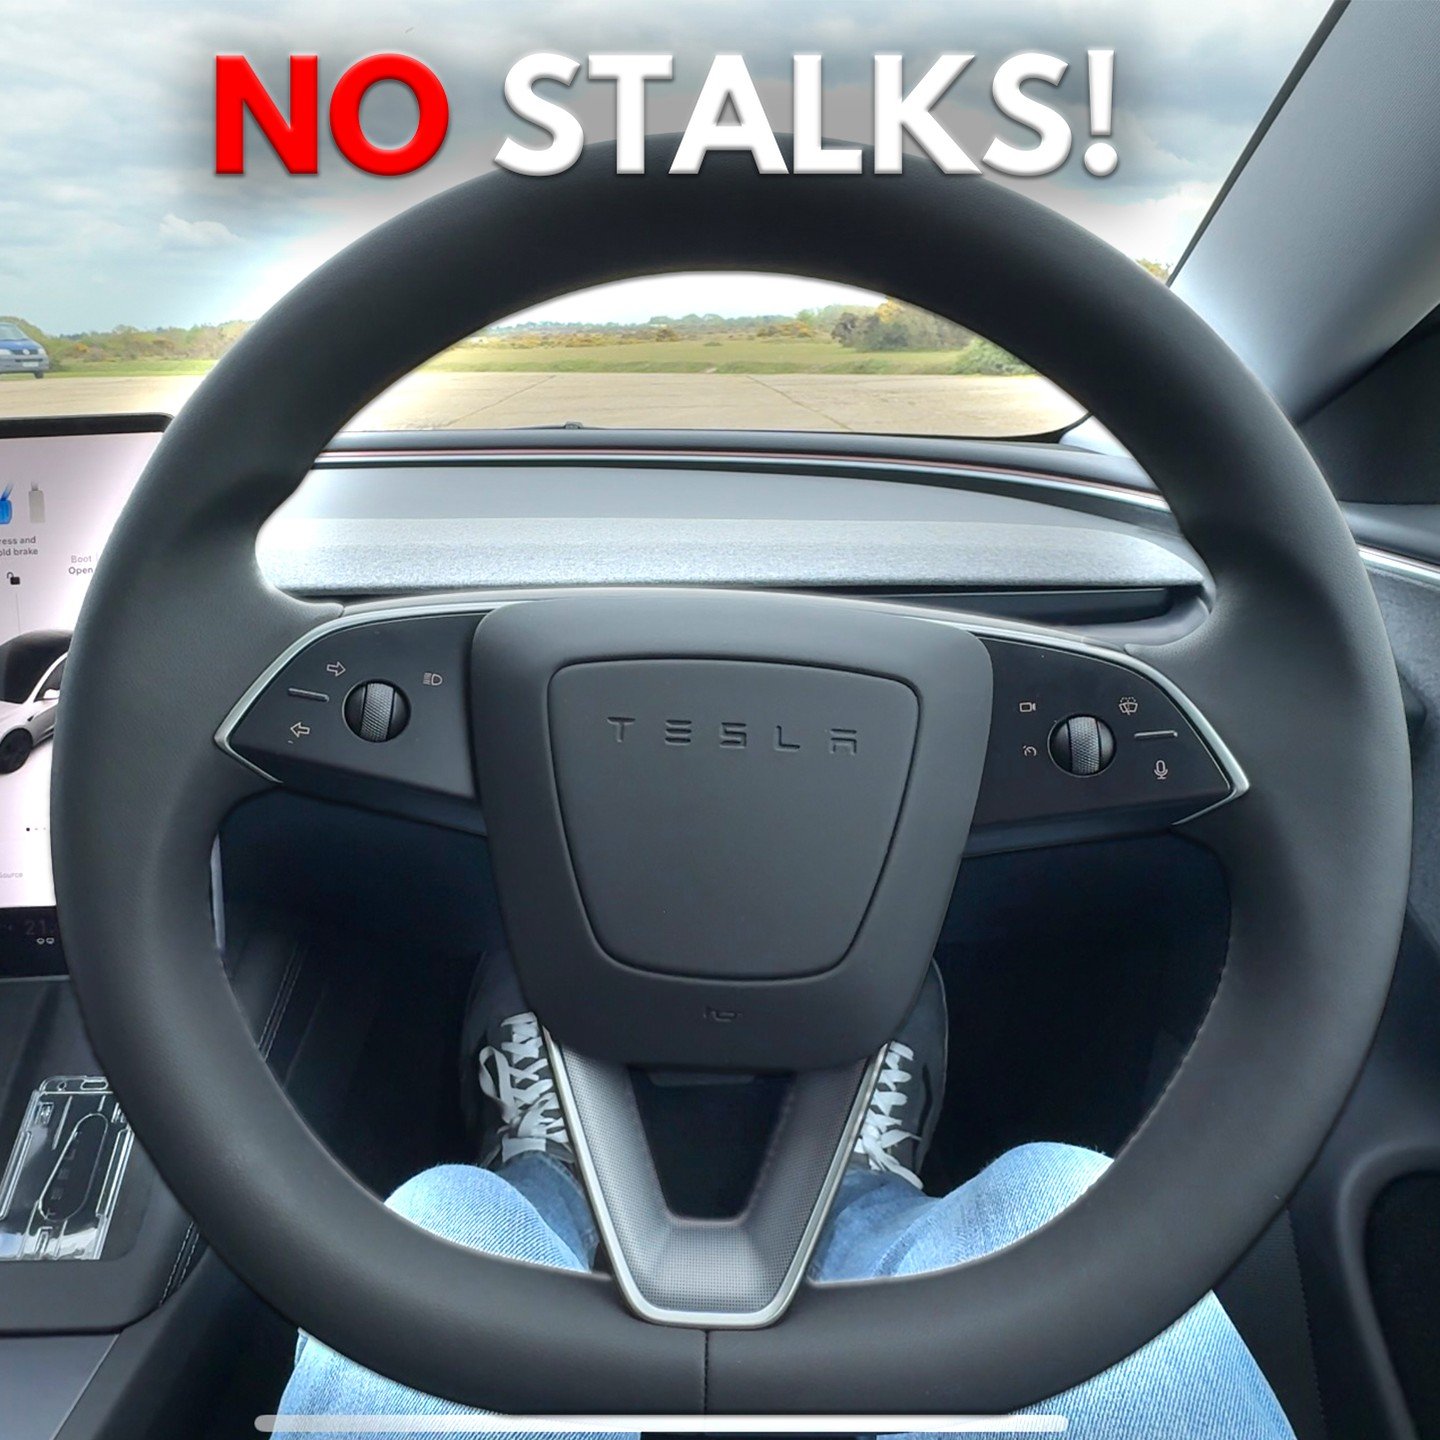 This car has no stalks...no wipers, no indicators...they're ALL on the steering wheel! 🤯

I'm testing the NEW Tesla Model 3 so if you have any questions, comment below and I may feature your question in the video. Recording today (Sunday) so message